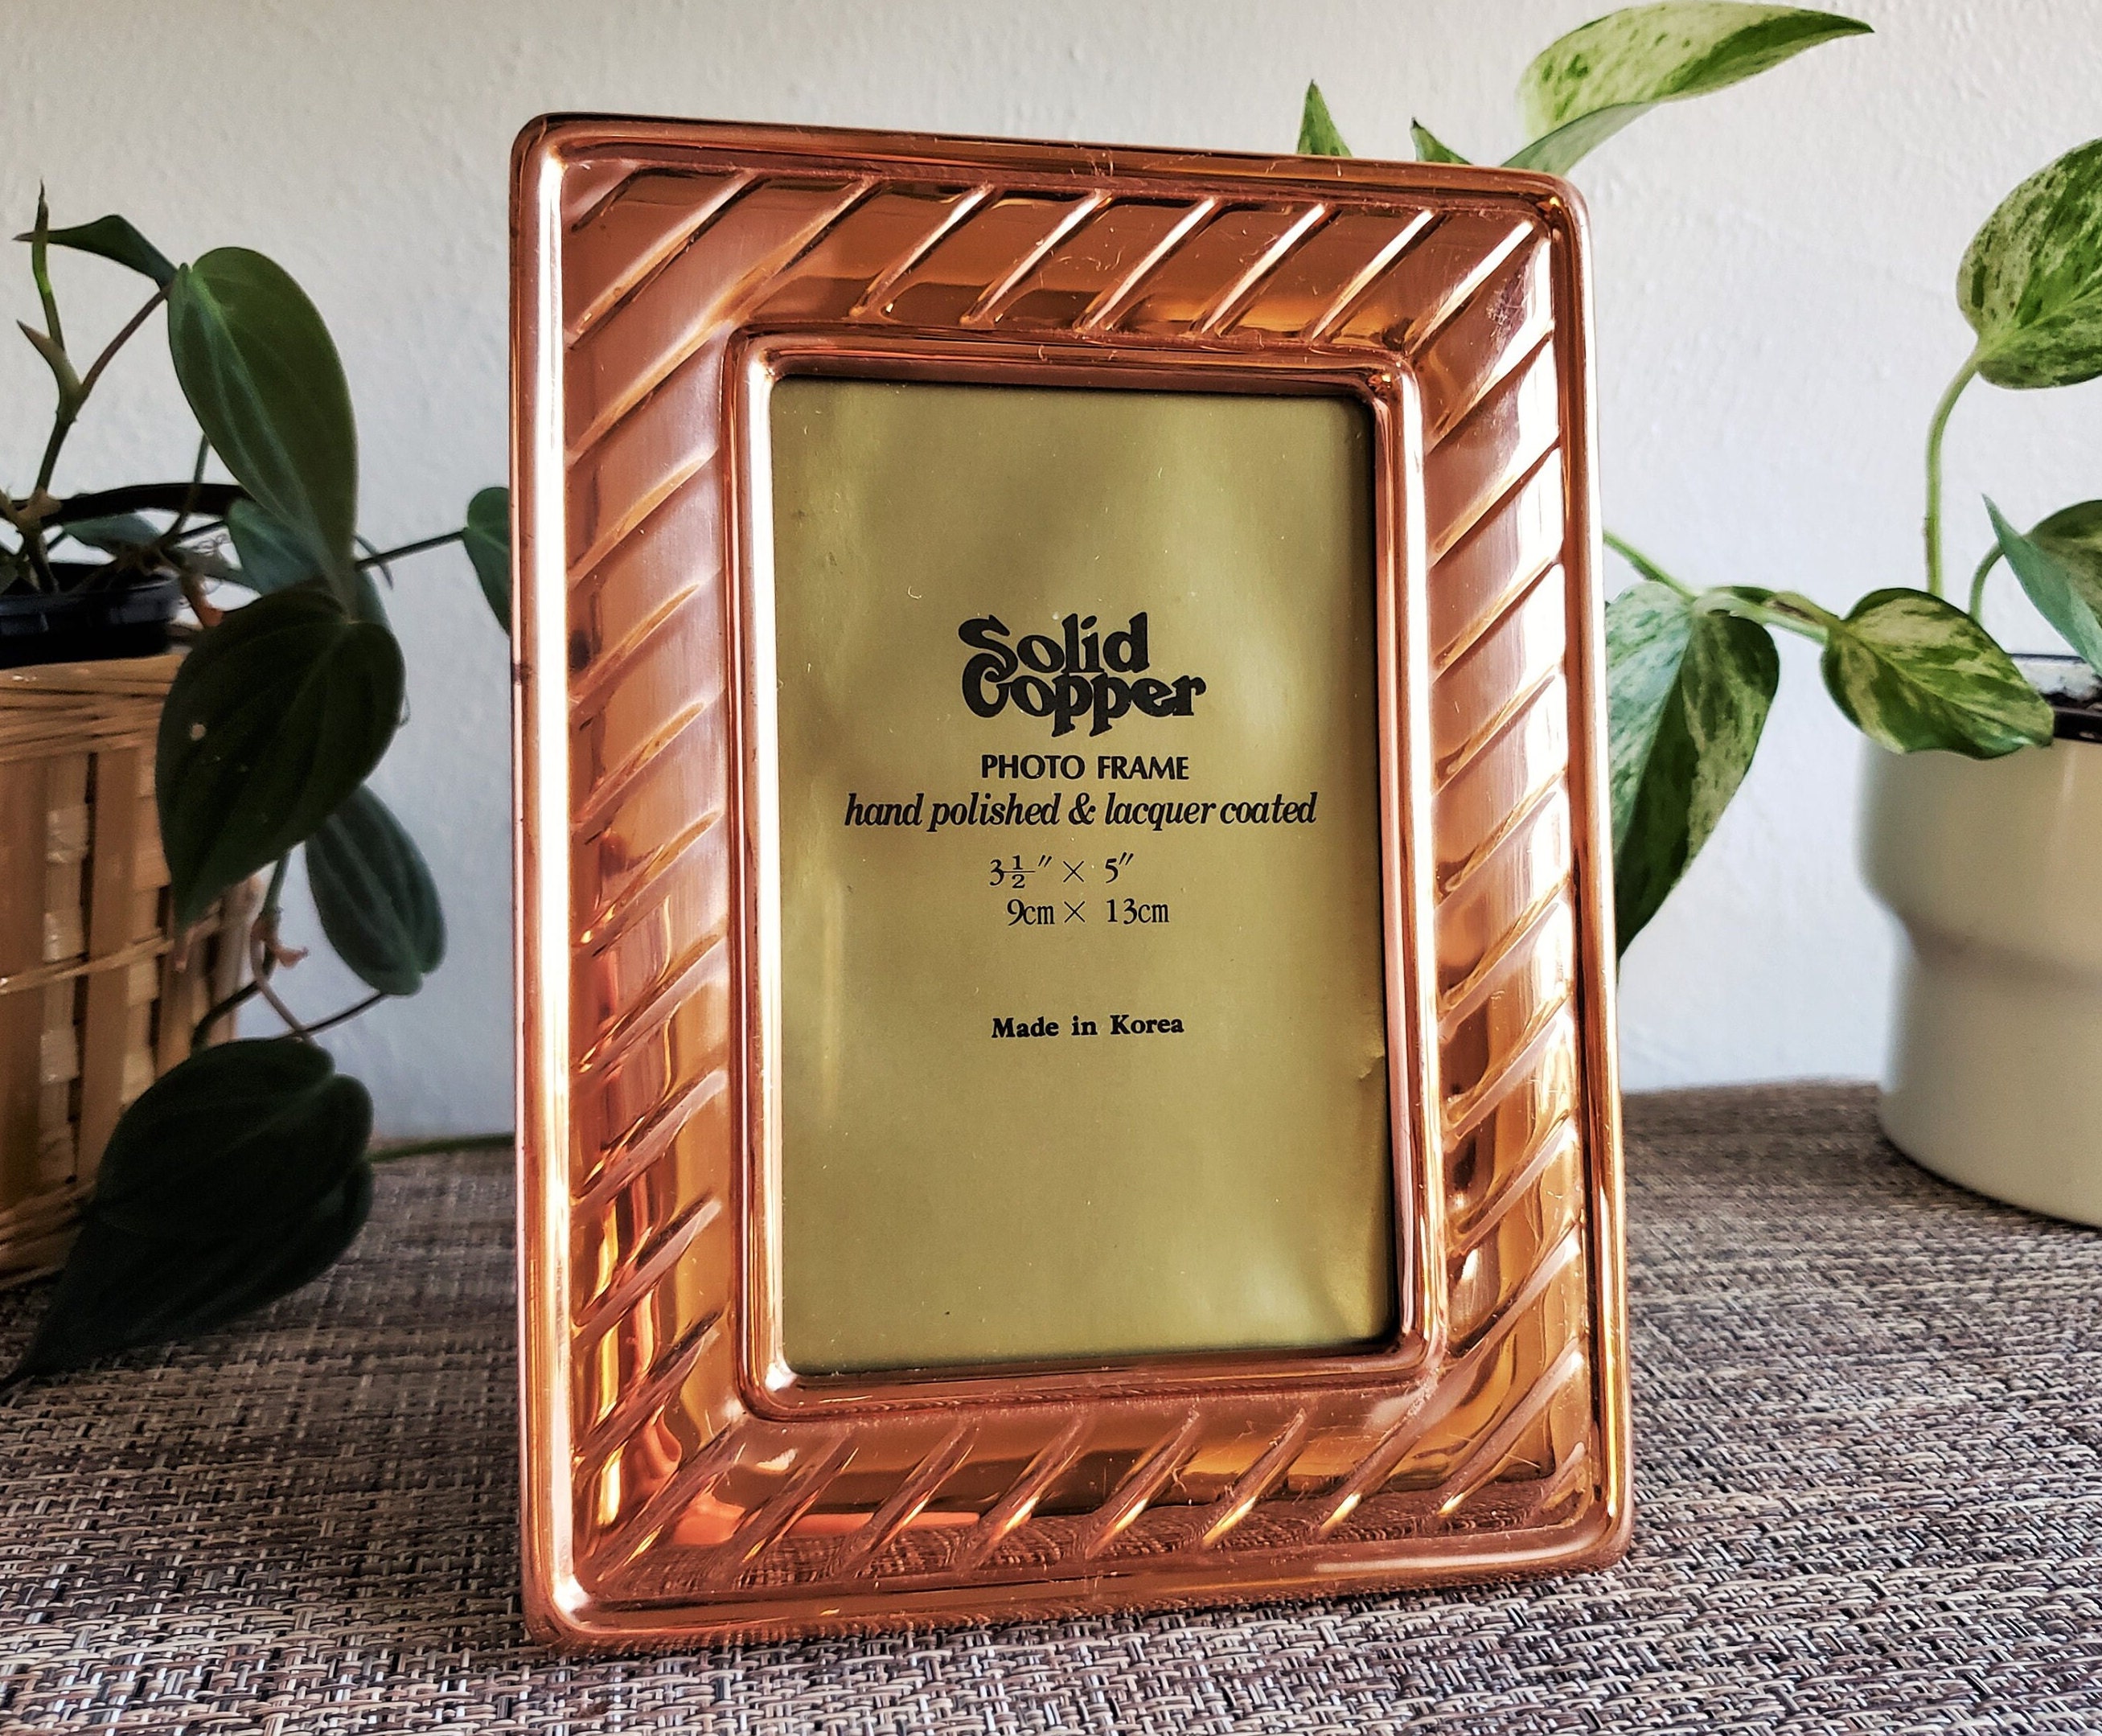 Vintage Solid Copper Photo Frame, 5 X 3.5, Made in Korea 